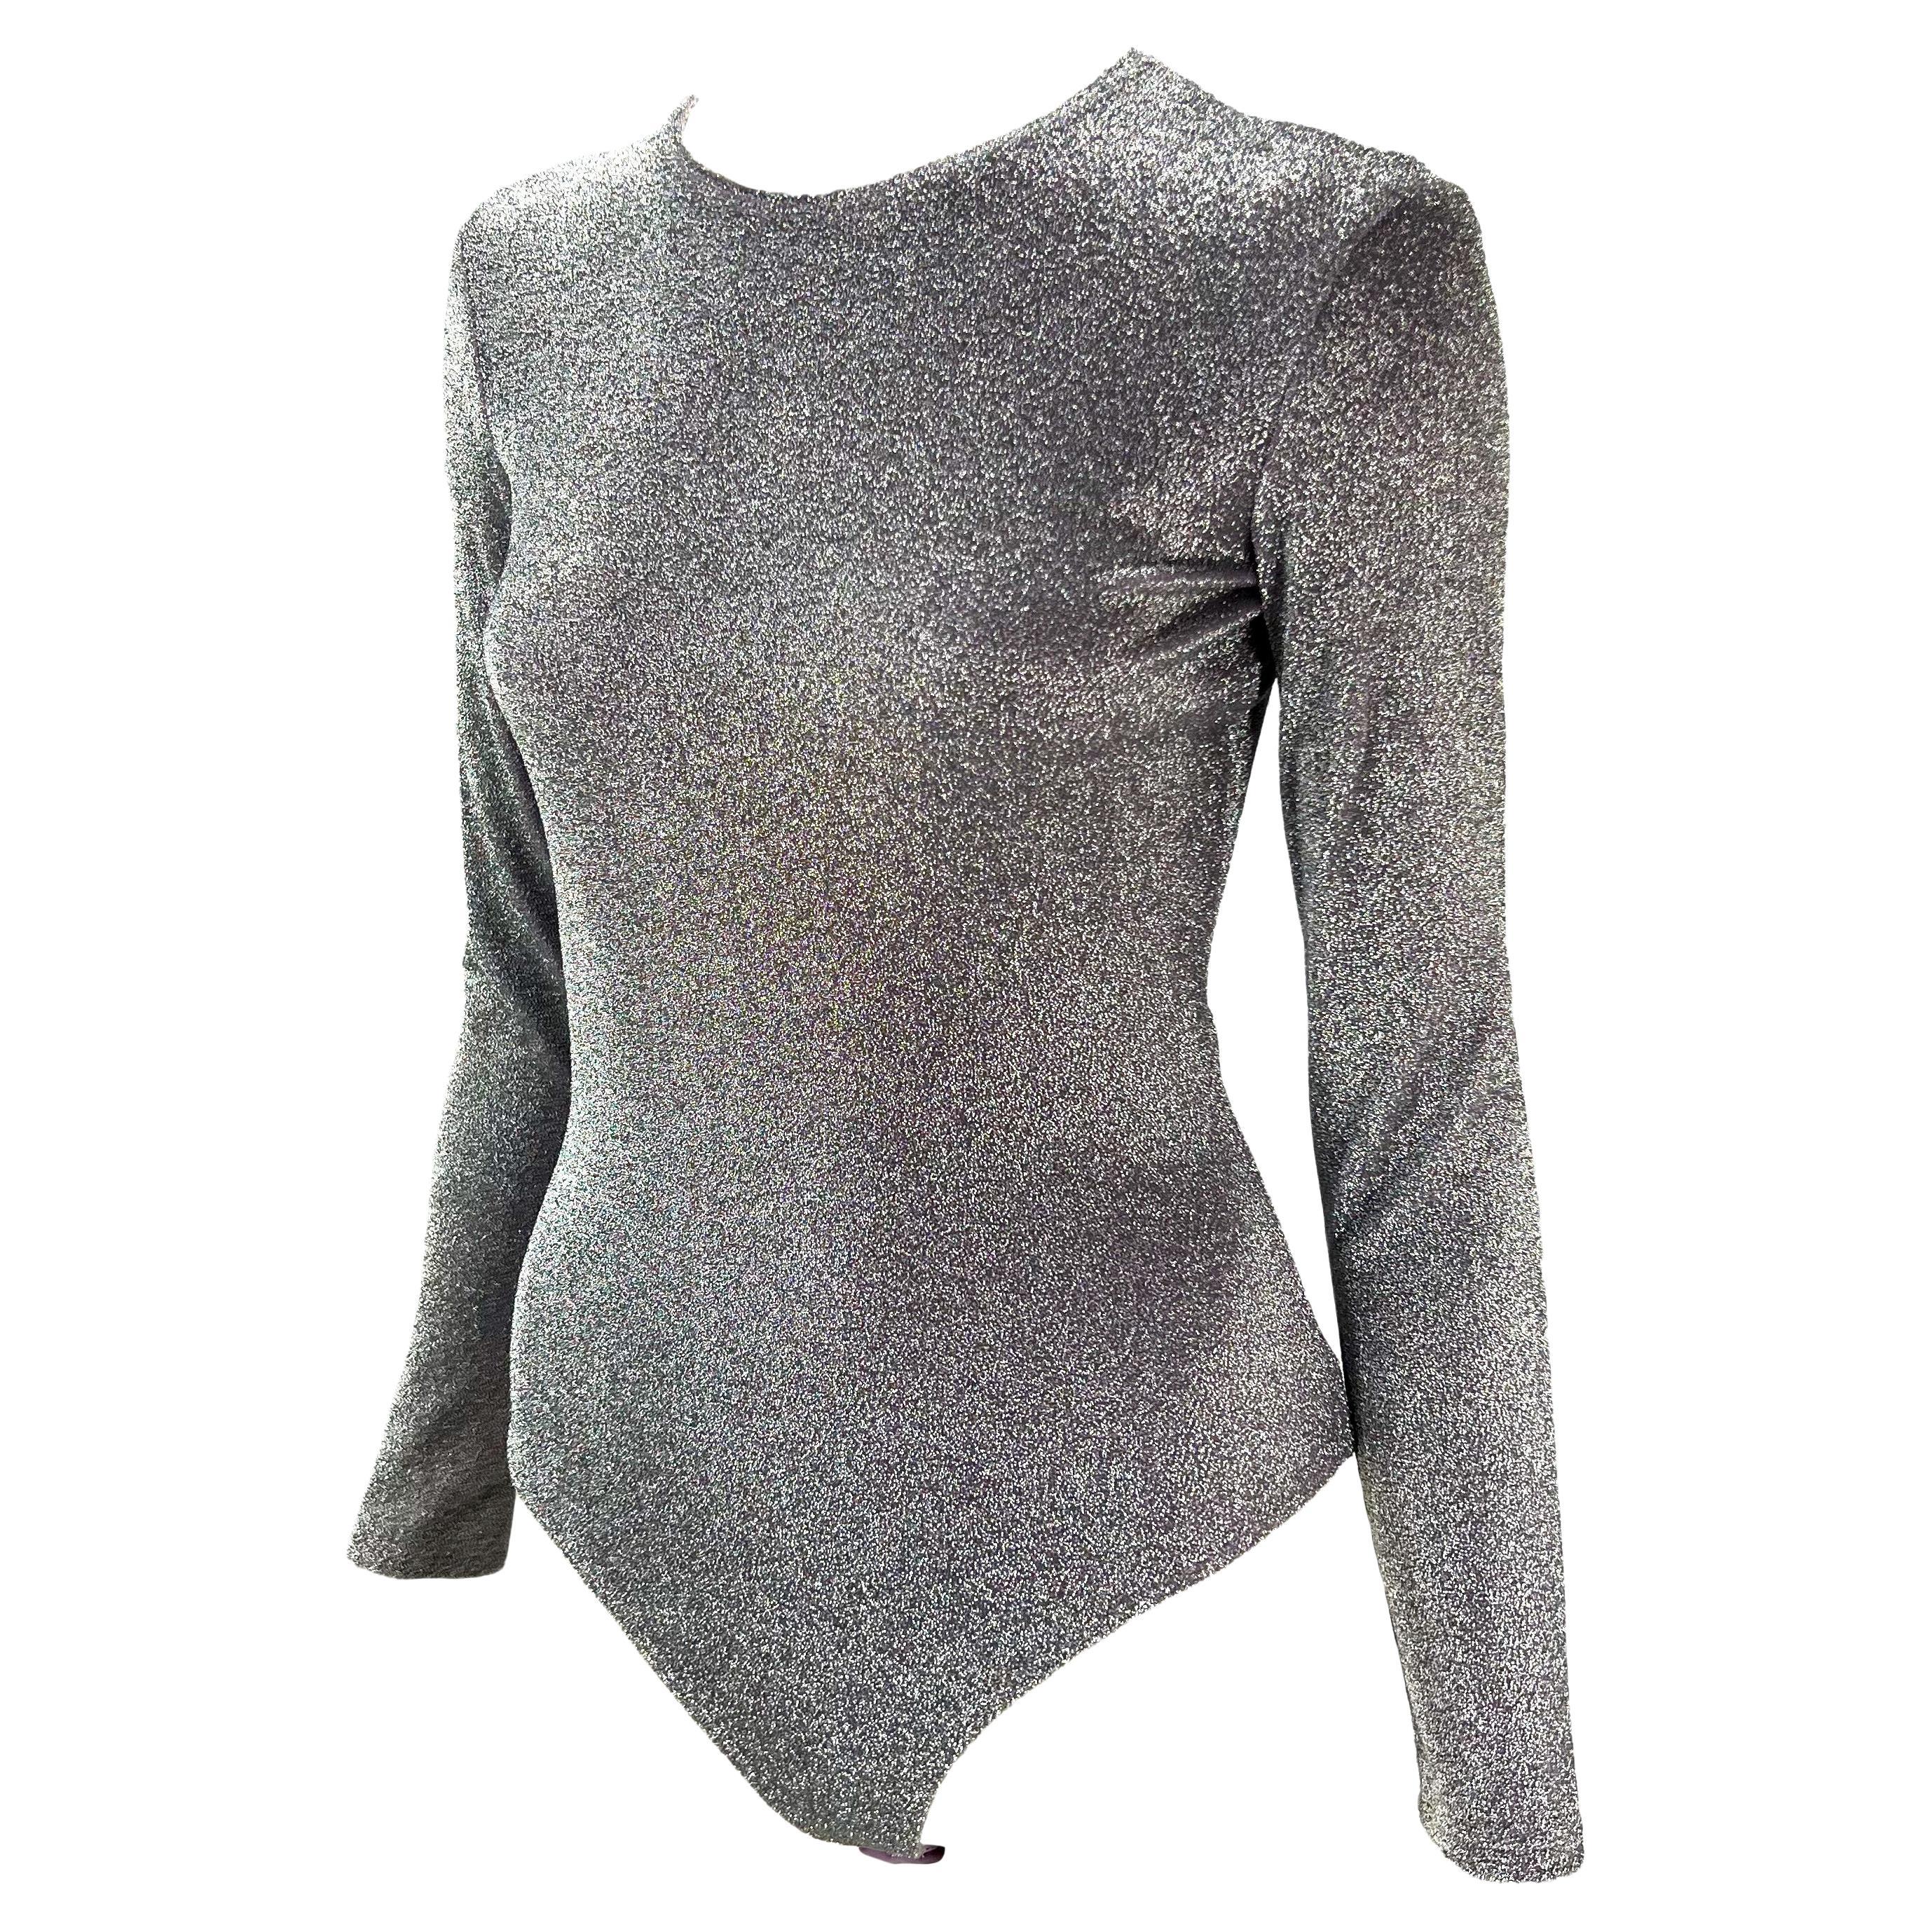 Presenting a silver and periwinkle lurex Gianni Versace Couture bodysuit, designed by Gianni Versace. From the Spring/Summer 1994 collection, this amazing one-piece features long sleeves and a wide neckline. Shimmer and shine in this rare piece of